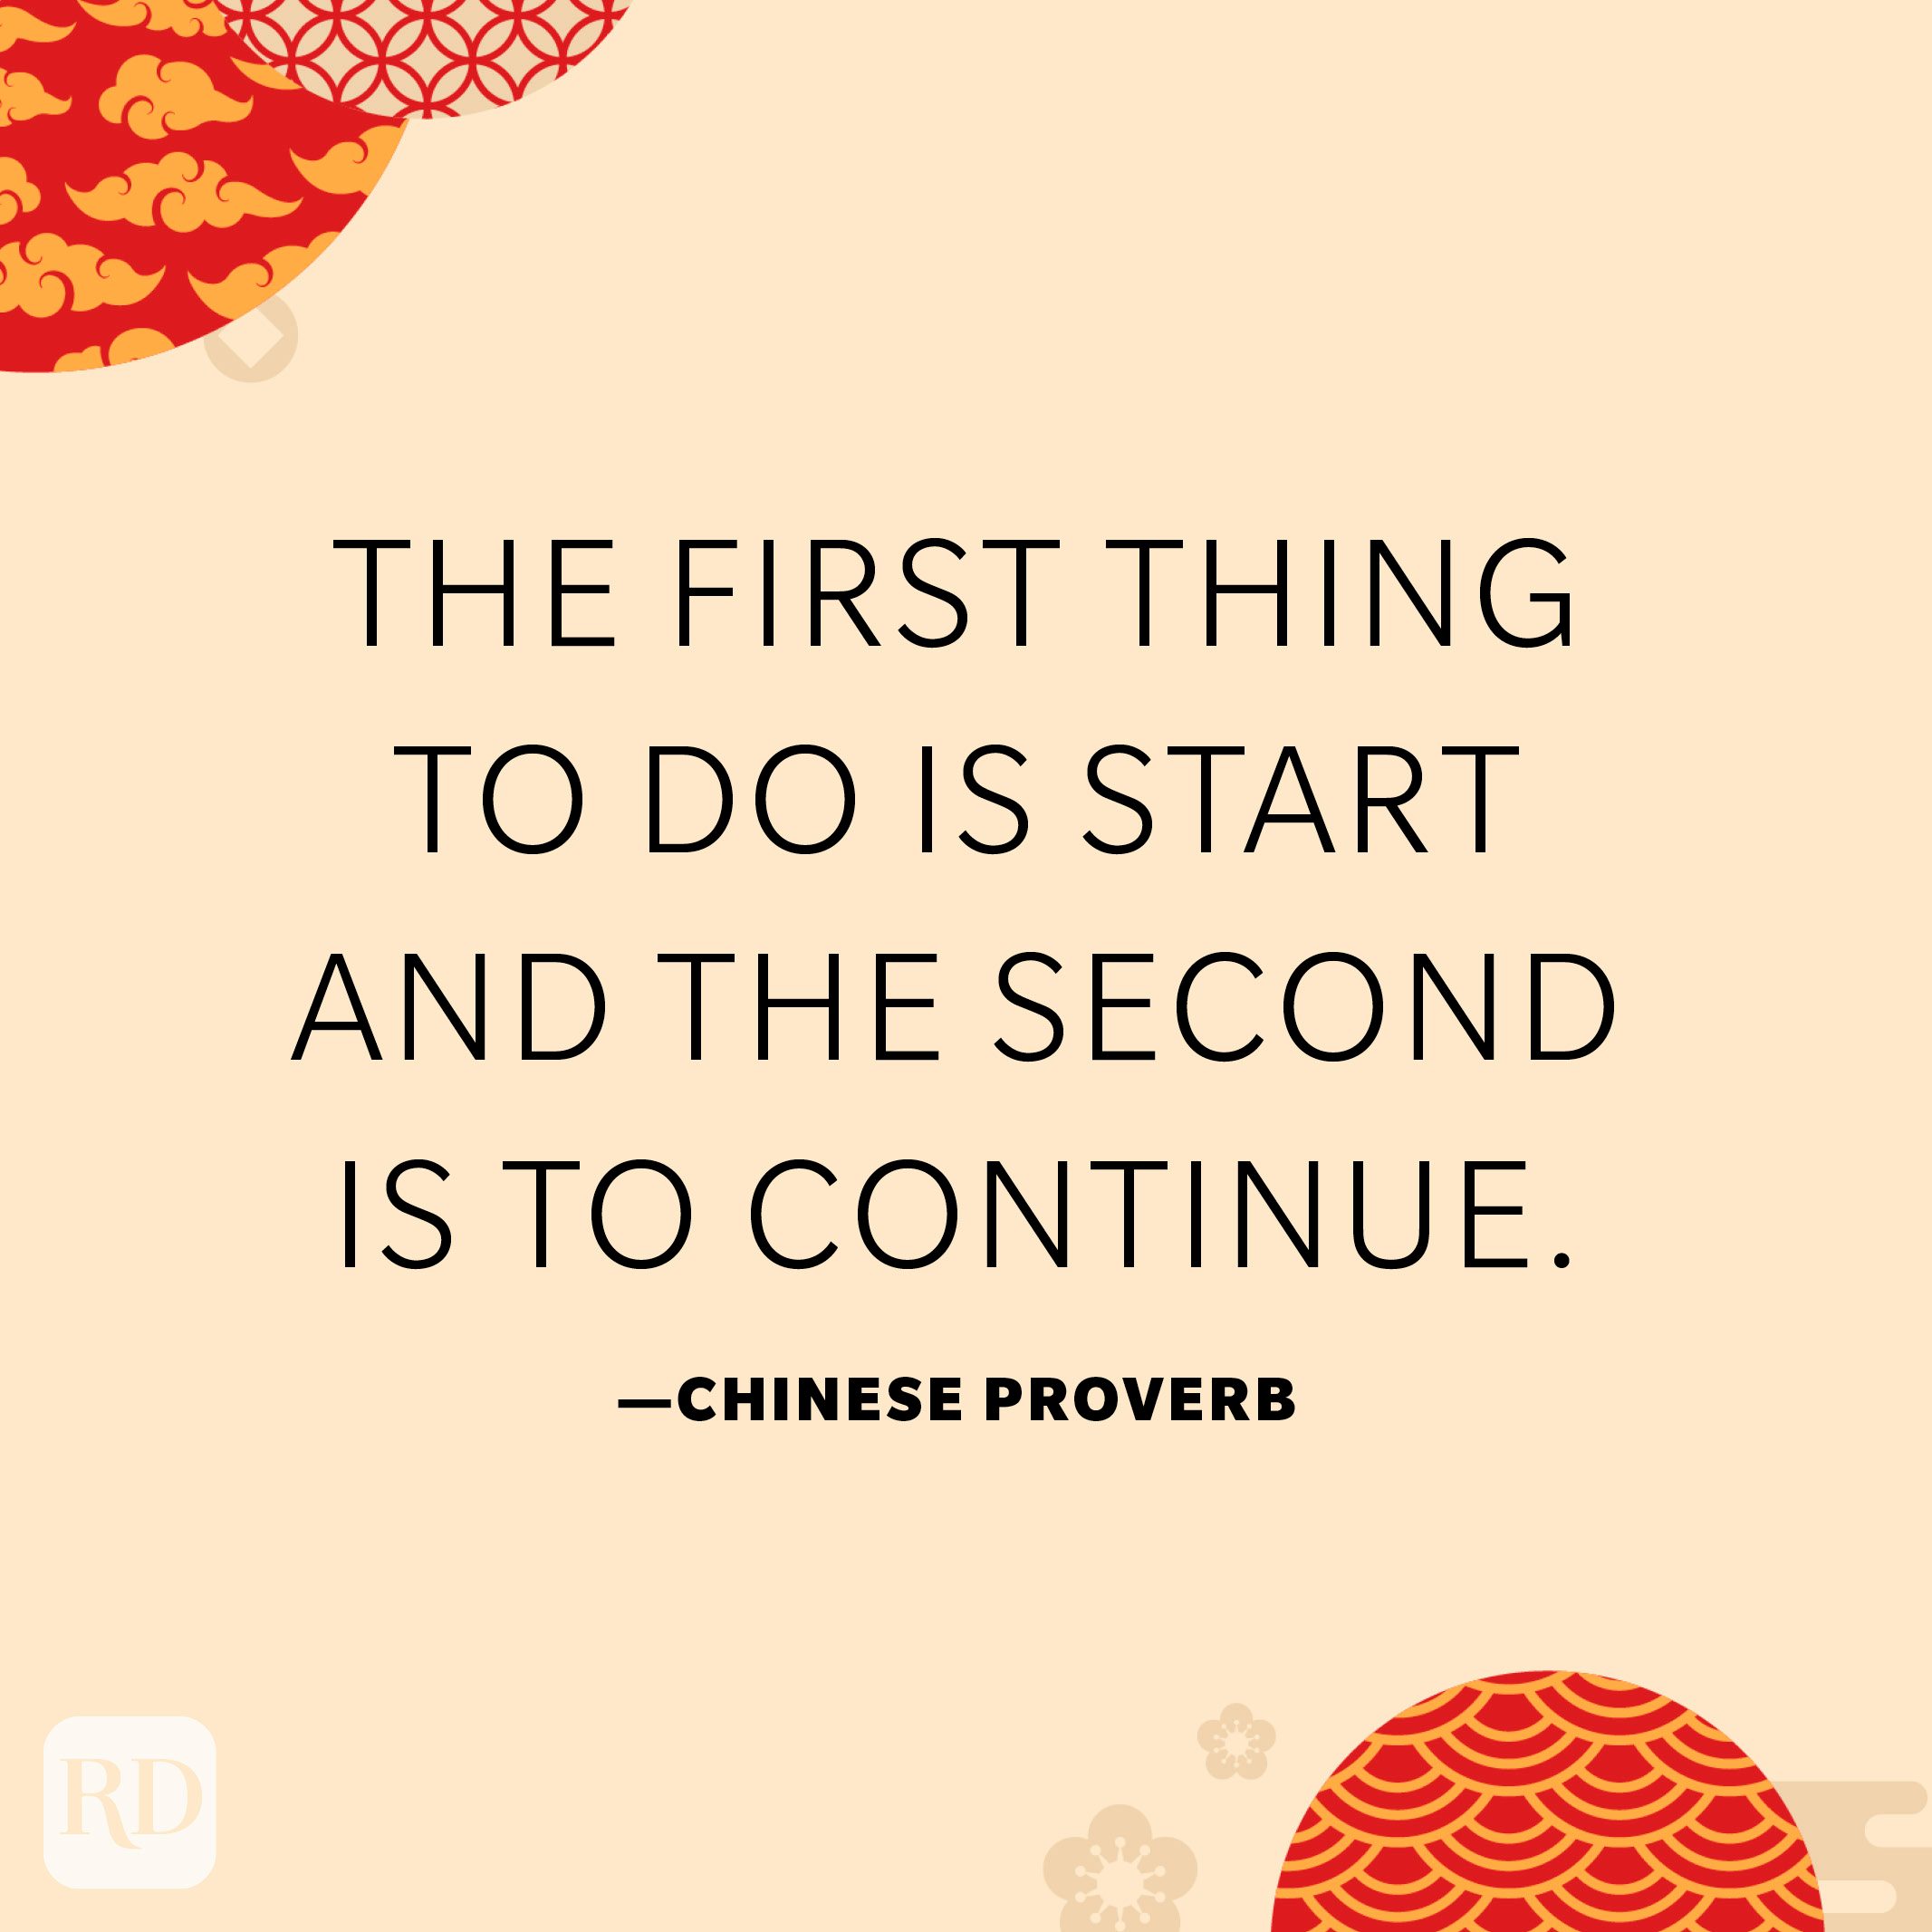 The first thing to do is start and the second is to continue